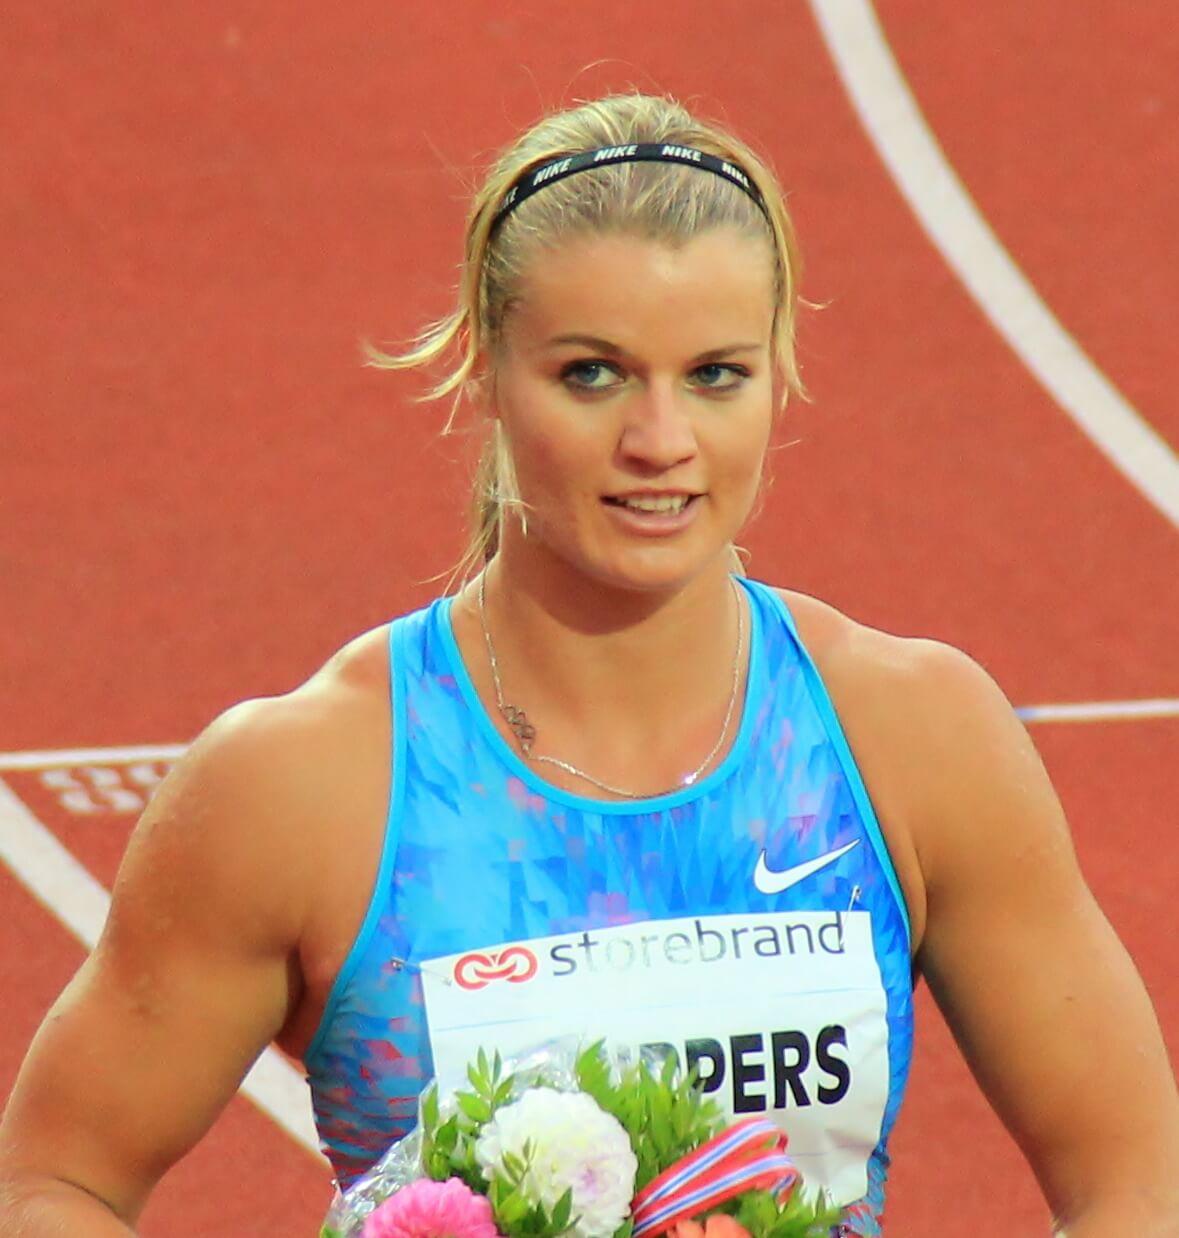 49 Hot Pictures Of Dafne Schippers Expose Her Sexy Hour-glass Figure | Best Of Comic Books